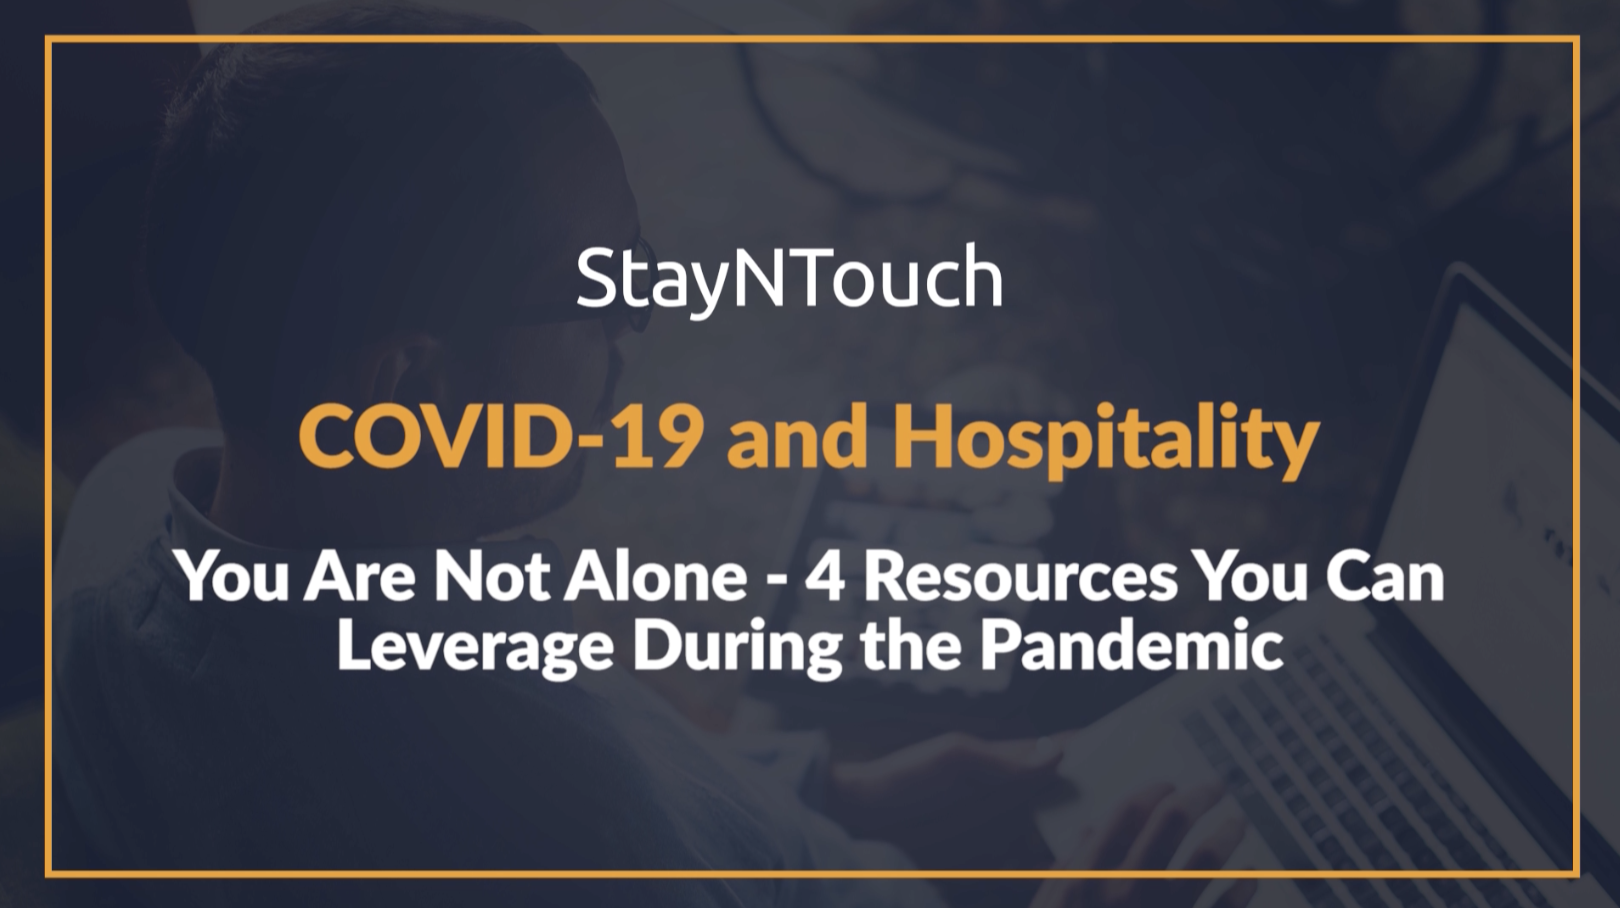 StayNTouch COVID-19 and Hospitality: 4 Resources to Leverage During the Pandemic